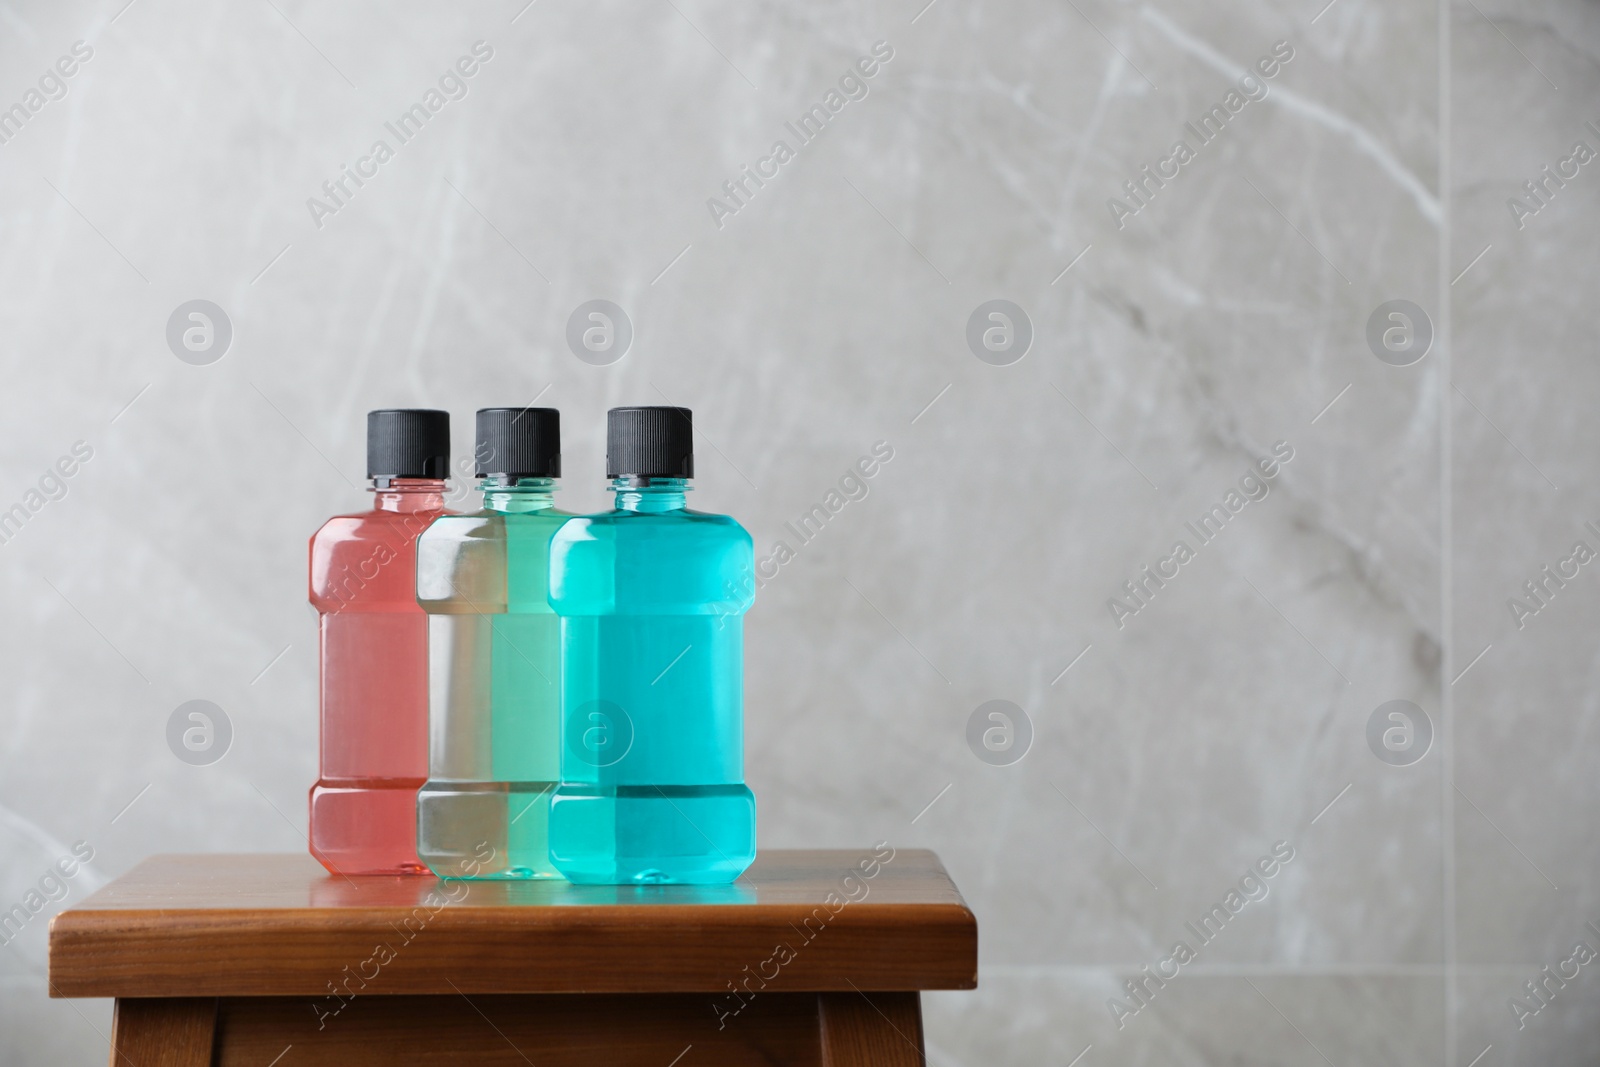 Photo of Bottles with mouthwash on wooden table, space for text